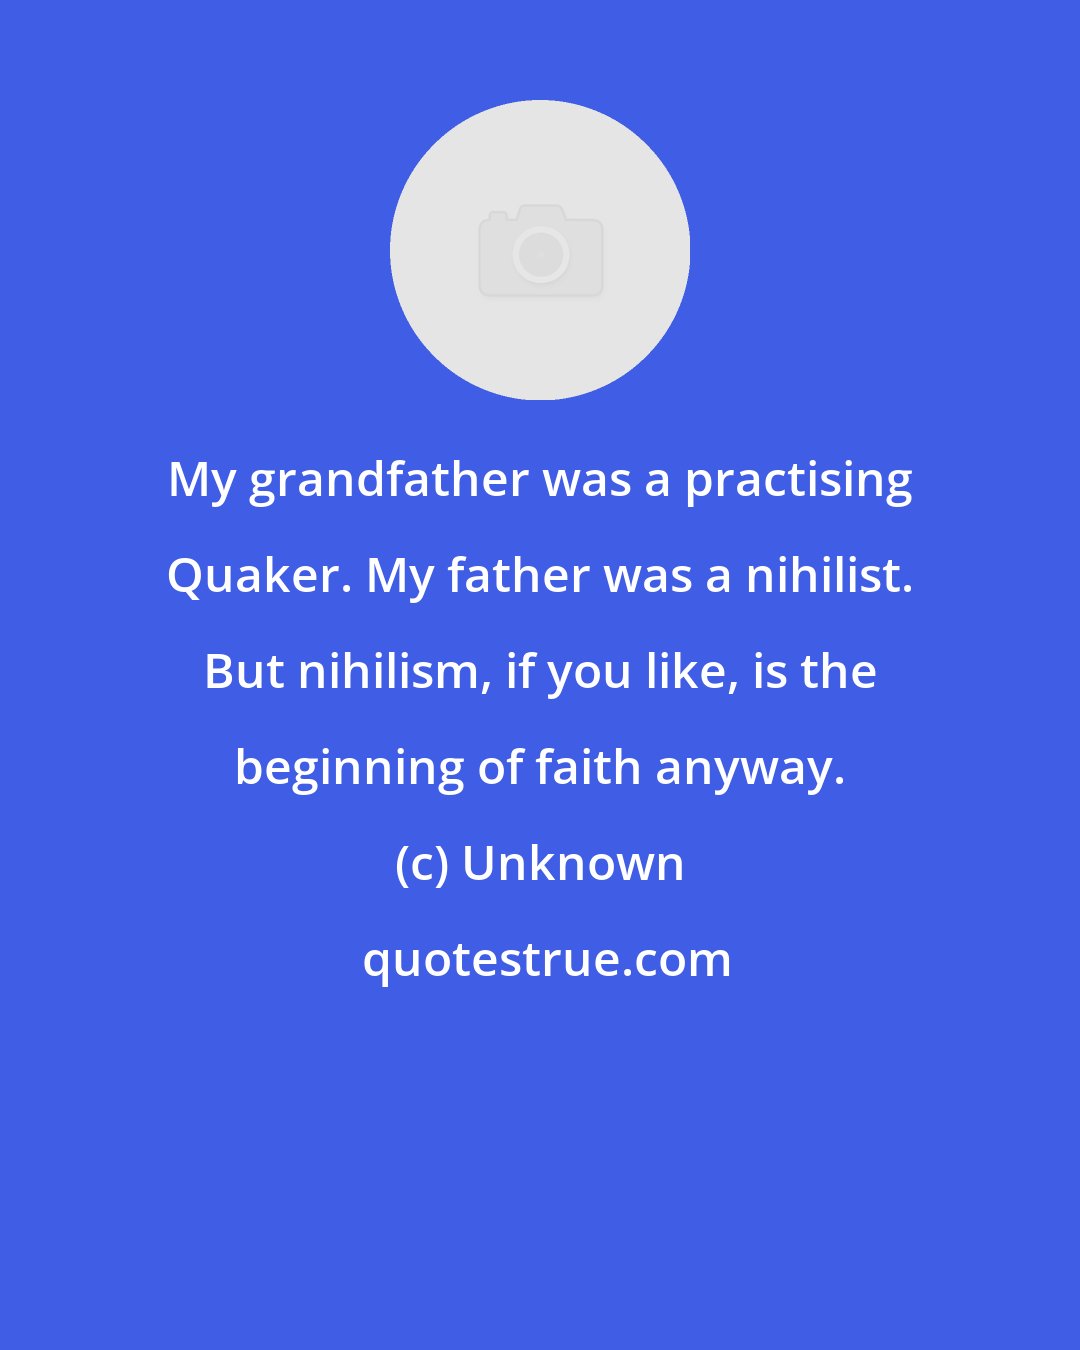 Unknown: My grandfather was a practising Quaker. My father was a nihilist. But nihilism, if you like, is the beginning of faith anyway.